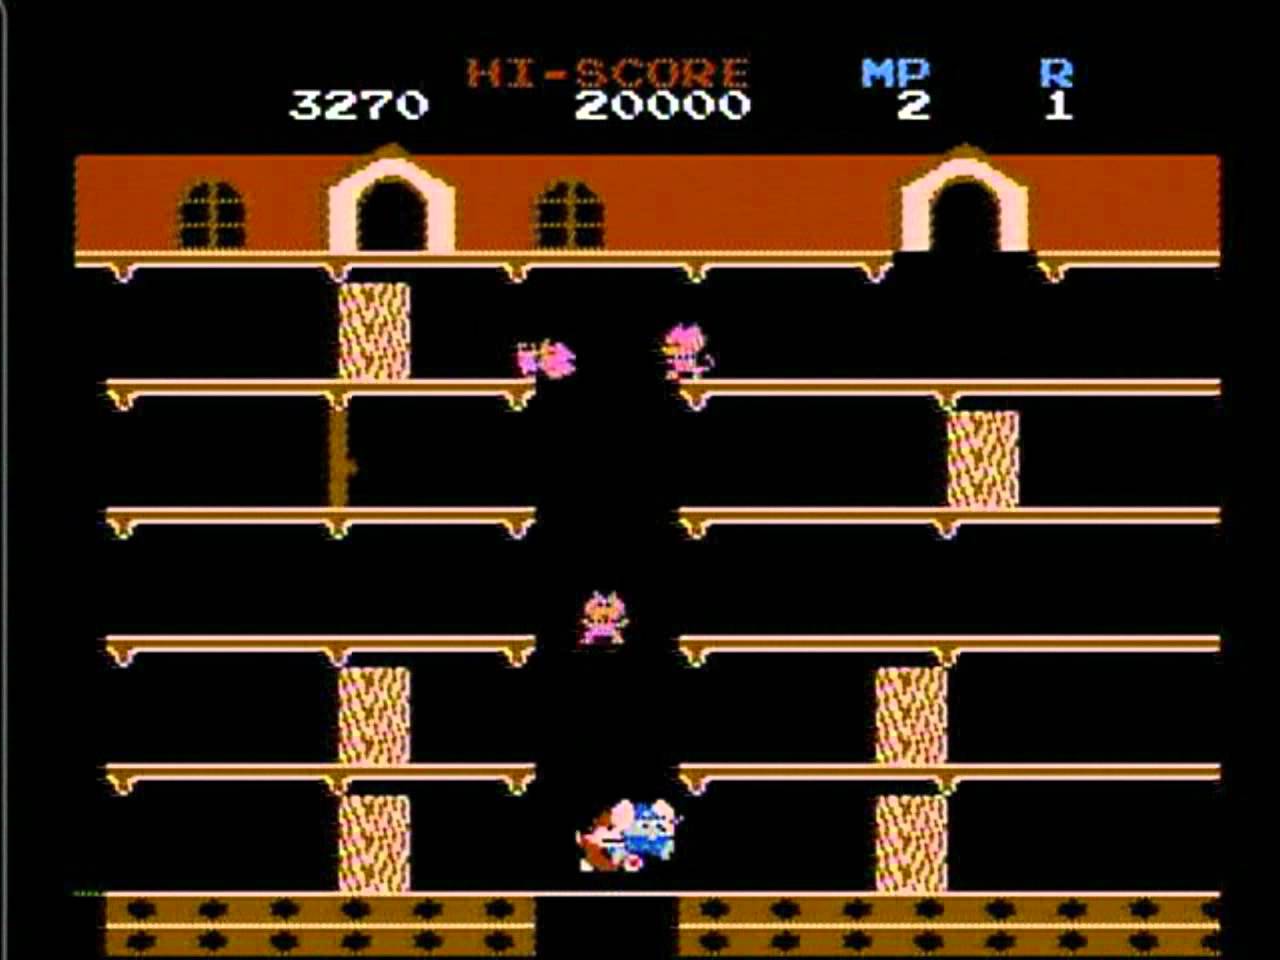 Namco’s Mouse, Mappy. 